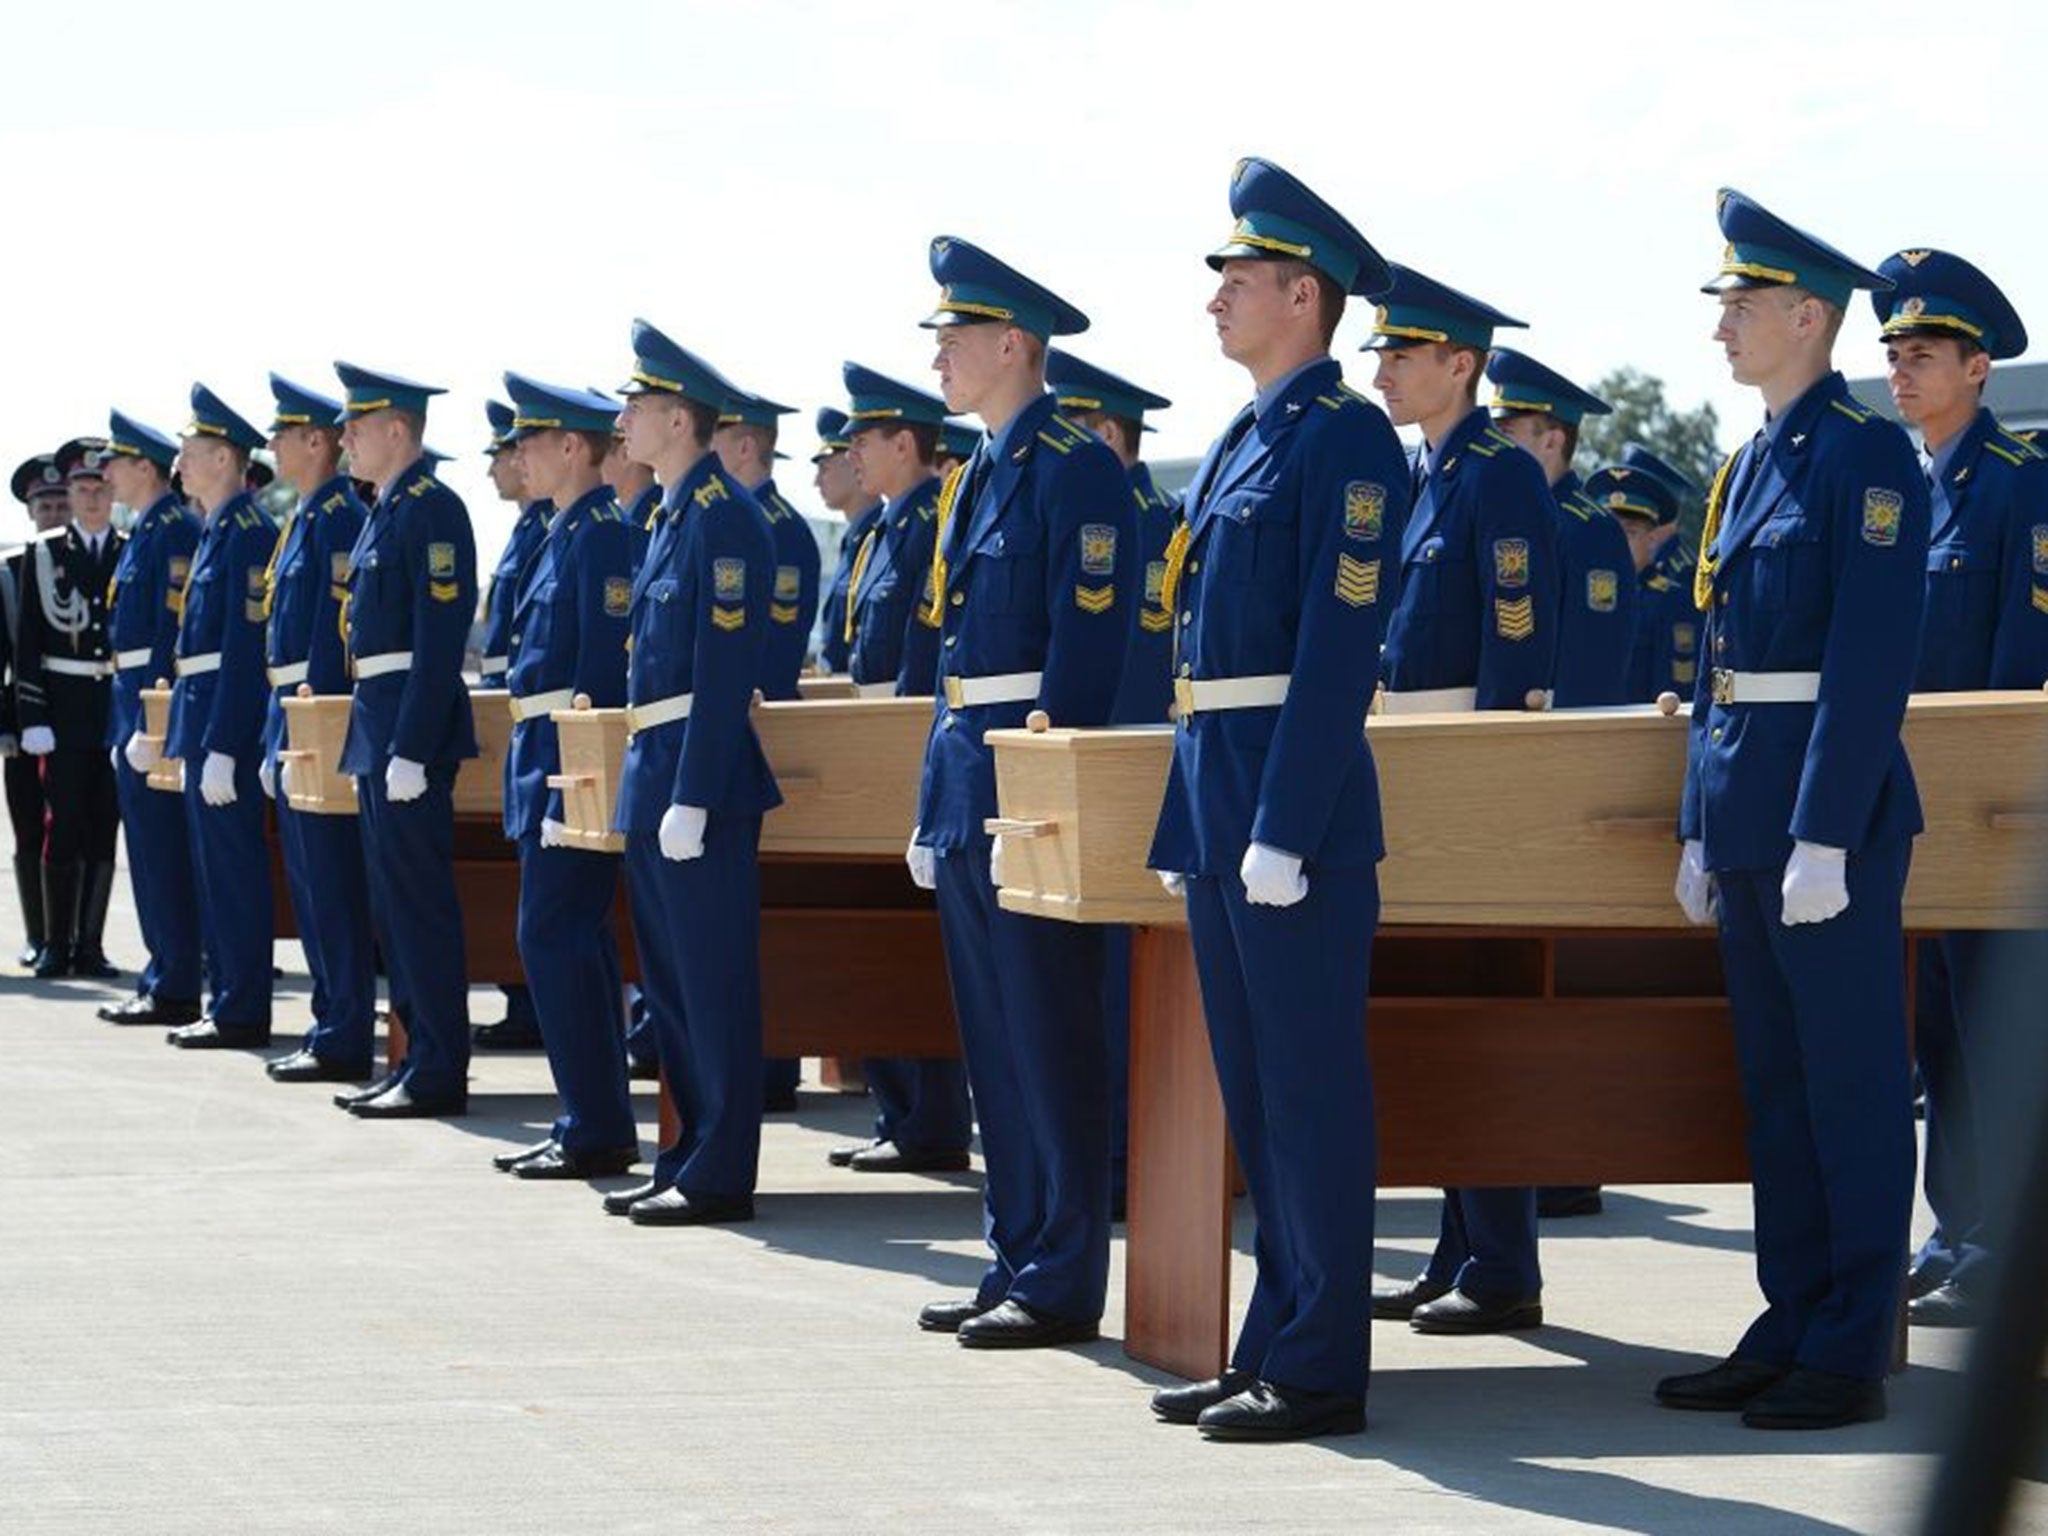 Four coffins with the remains of a victim of the Malaysia Airlines flight MH17 are carried to a military plane during a ceremony on the airport of Kharkiv, Ukraine, 23 July 2014.